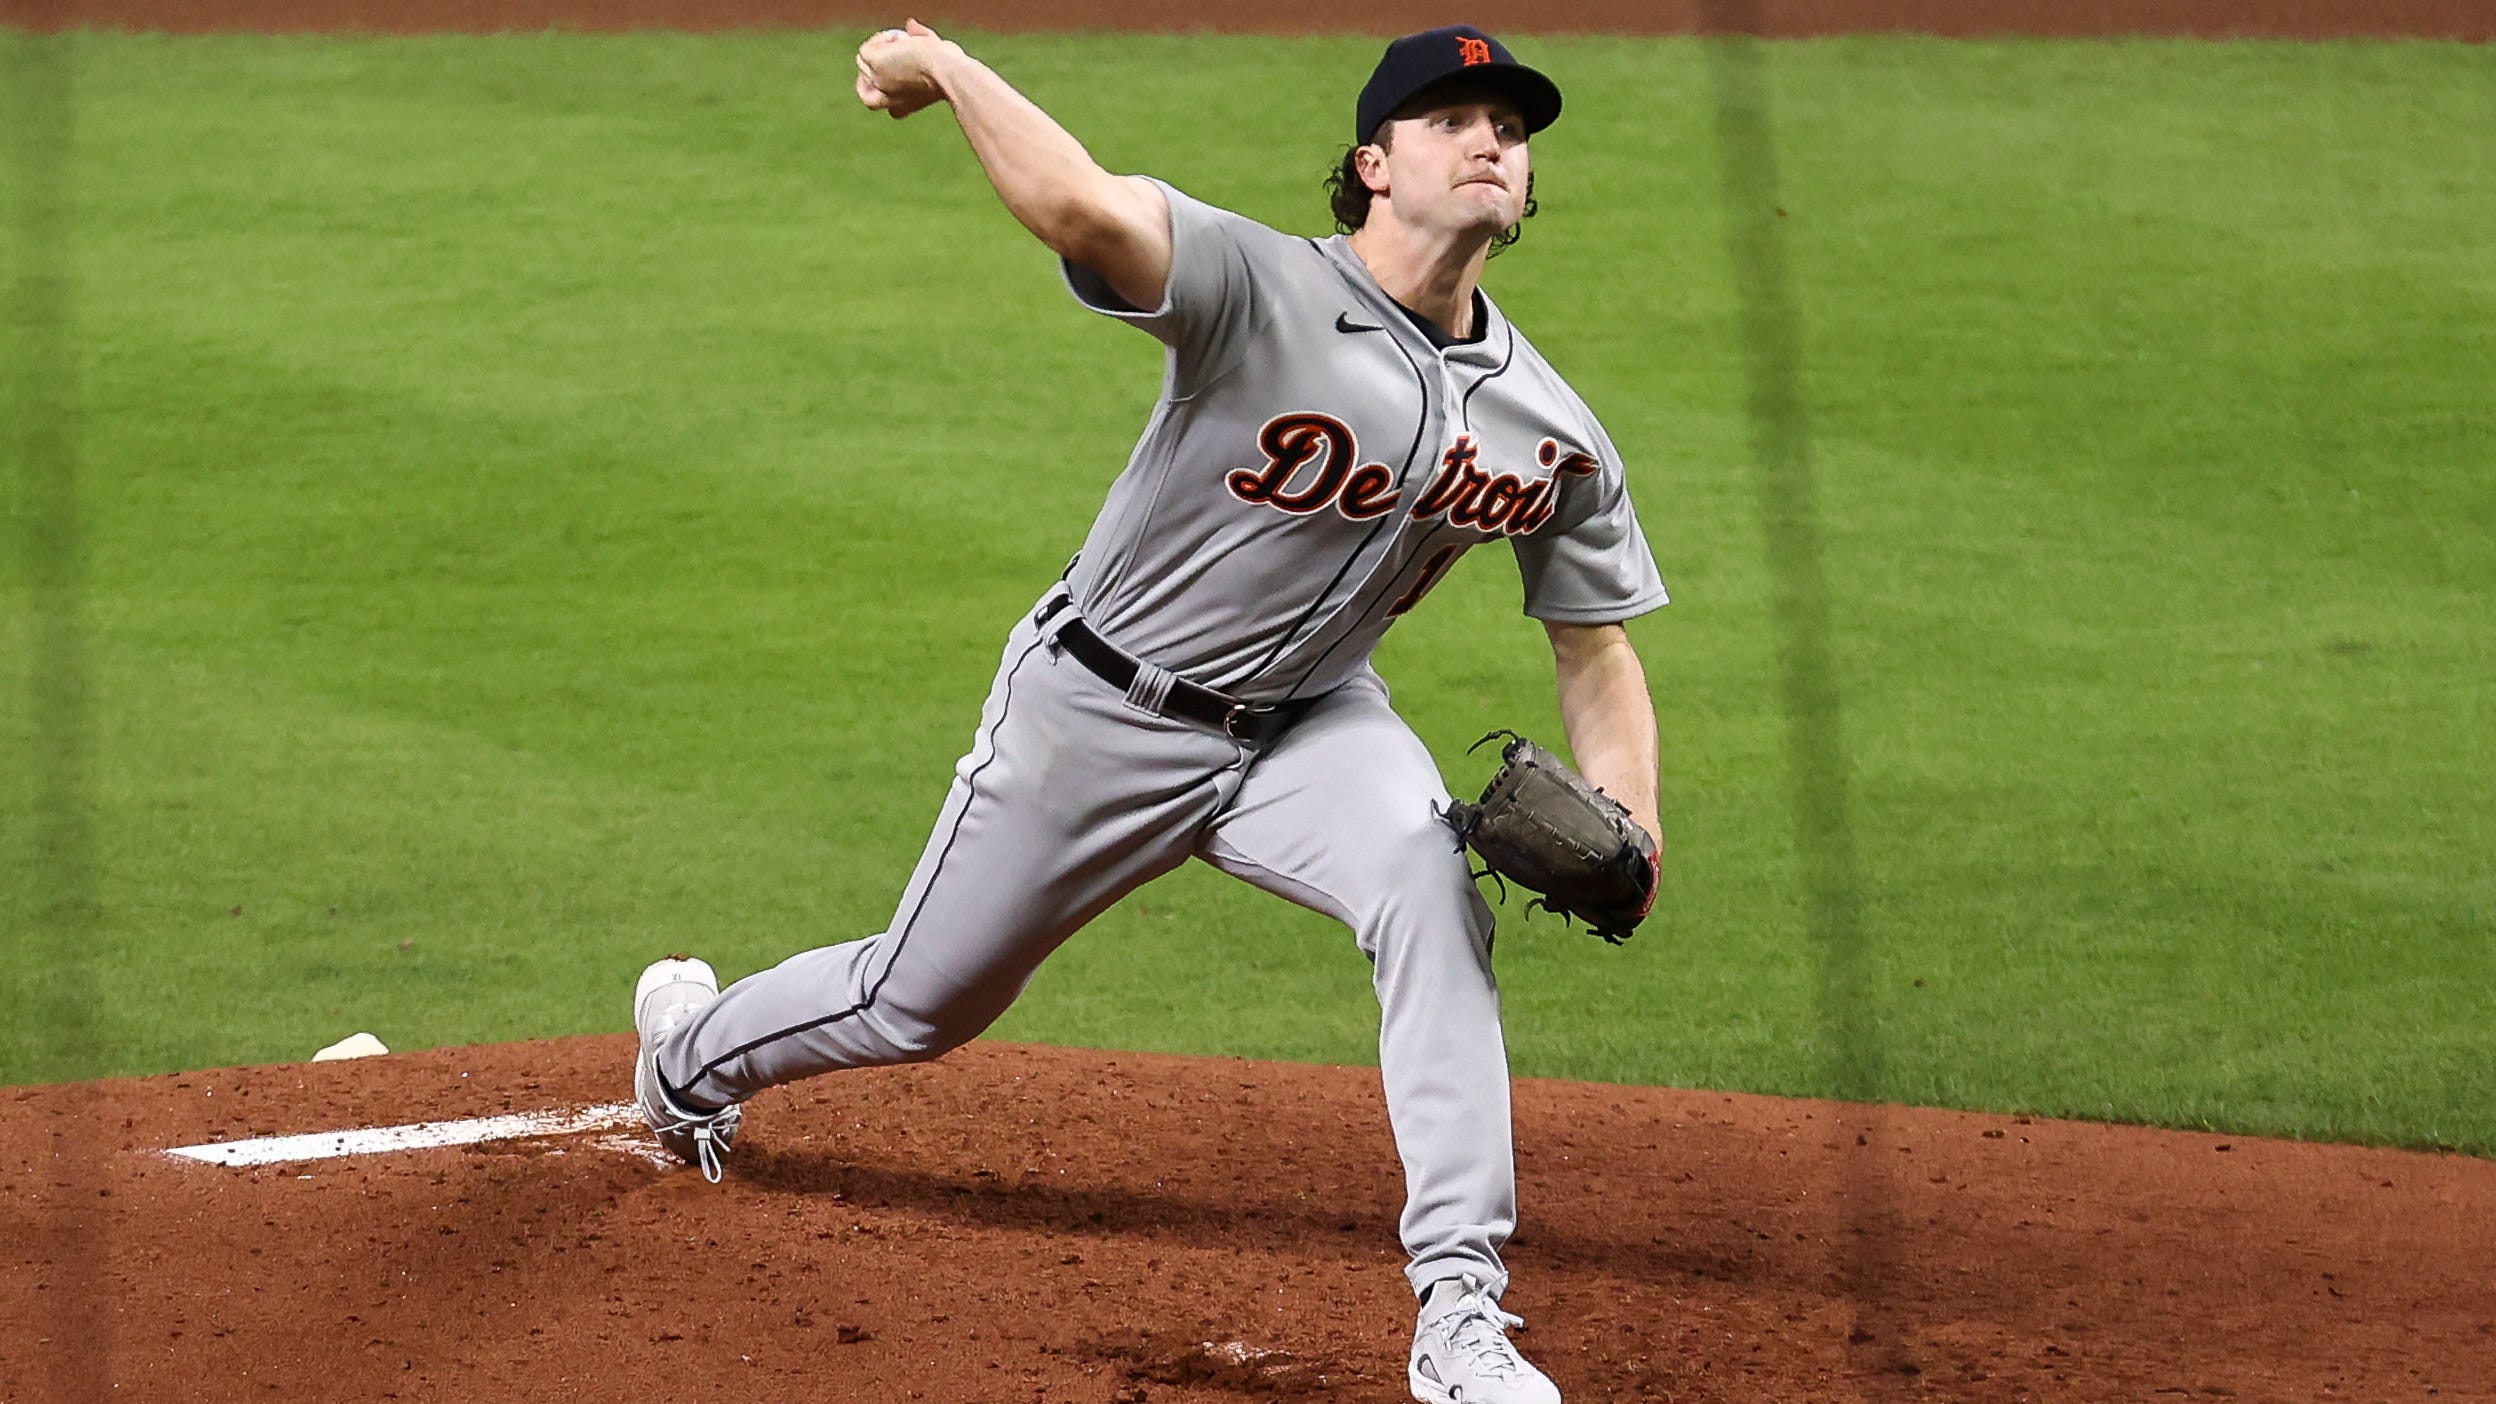 Detroit Tigers starting pitcher Casey Mize (12) delivers a pitch during the third inning against the Houston Astros April 12, 2021 at Minute Maid Park.